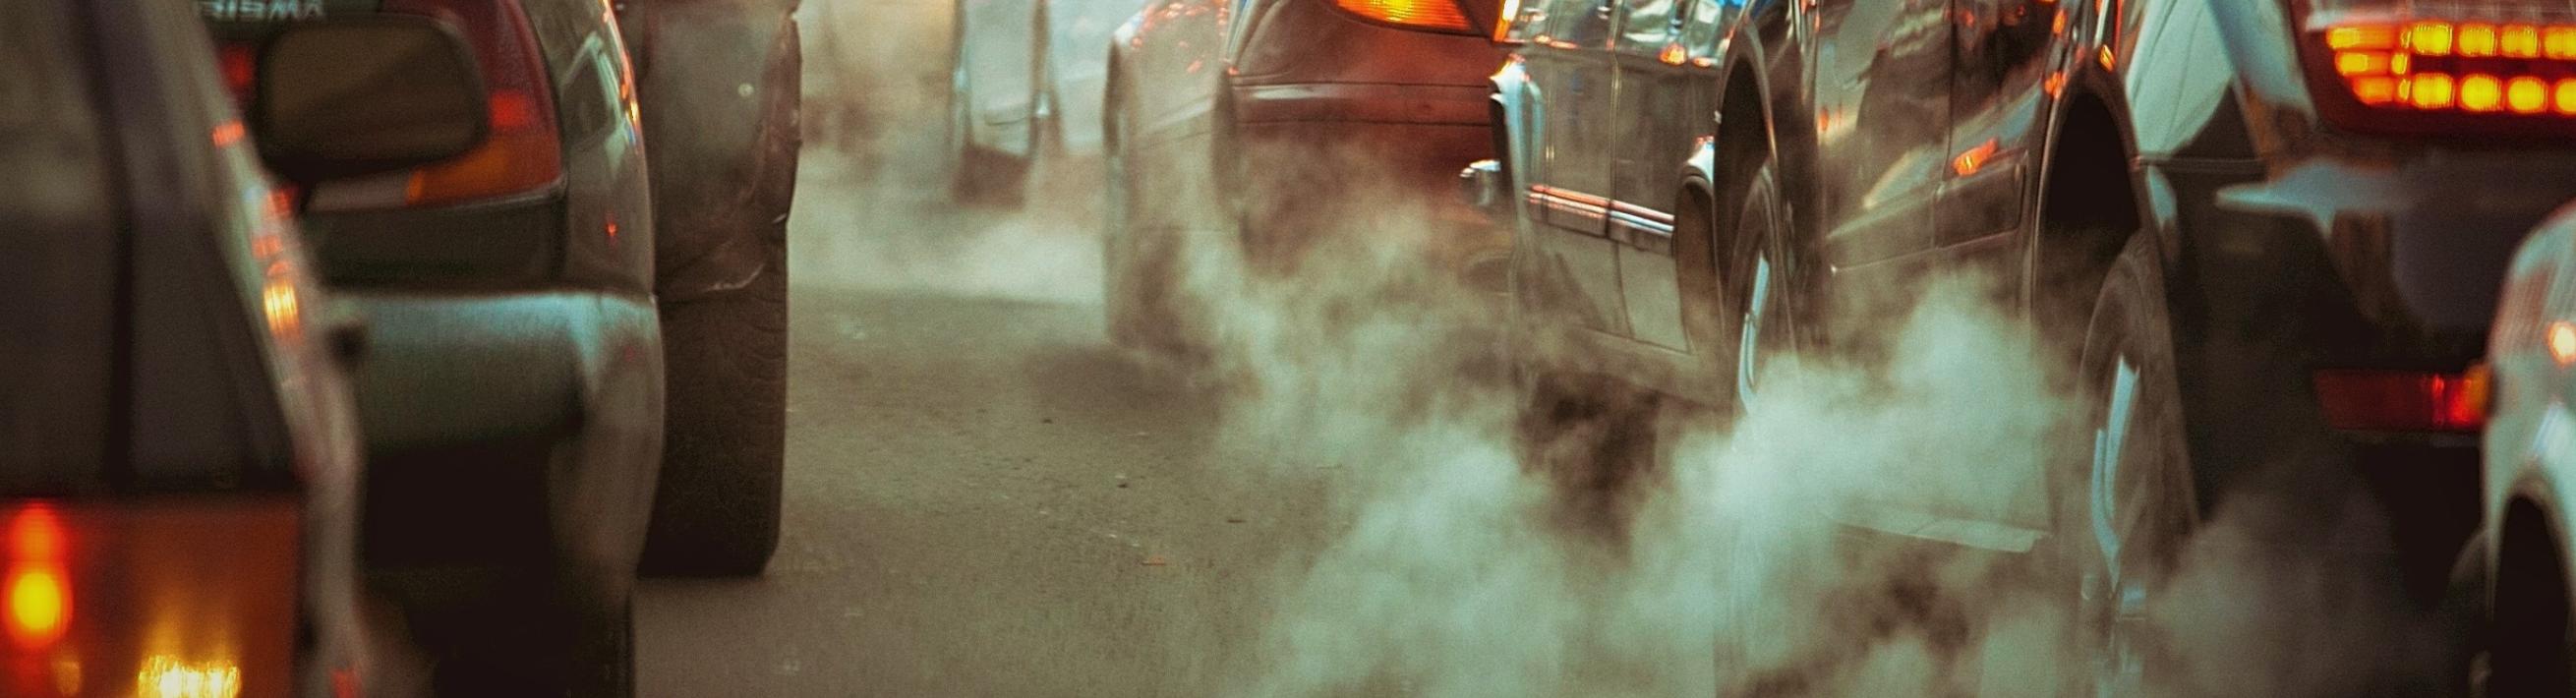 Tailpipe emissions from fuel burning vehicles